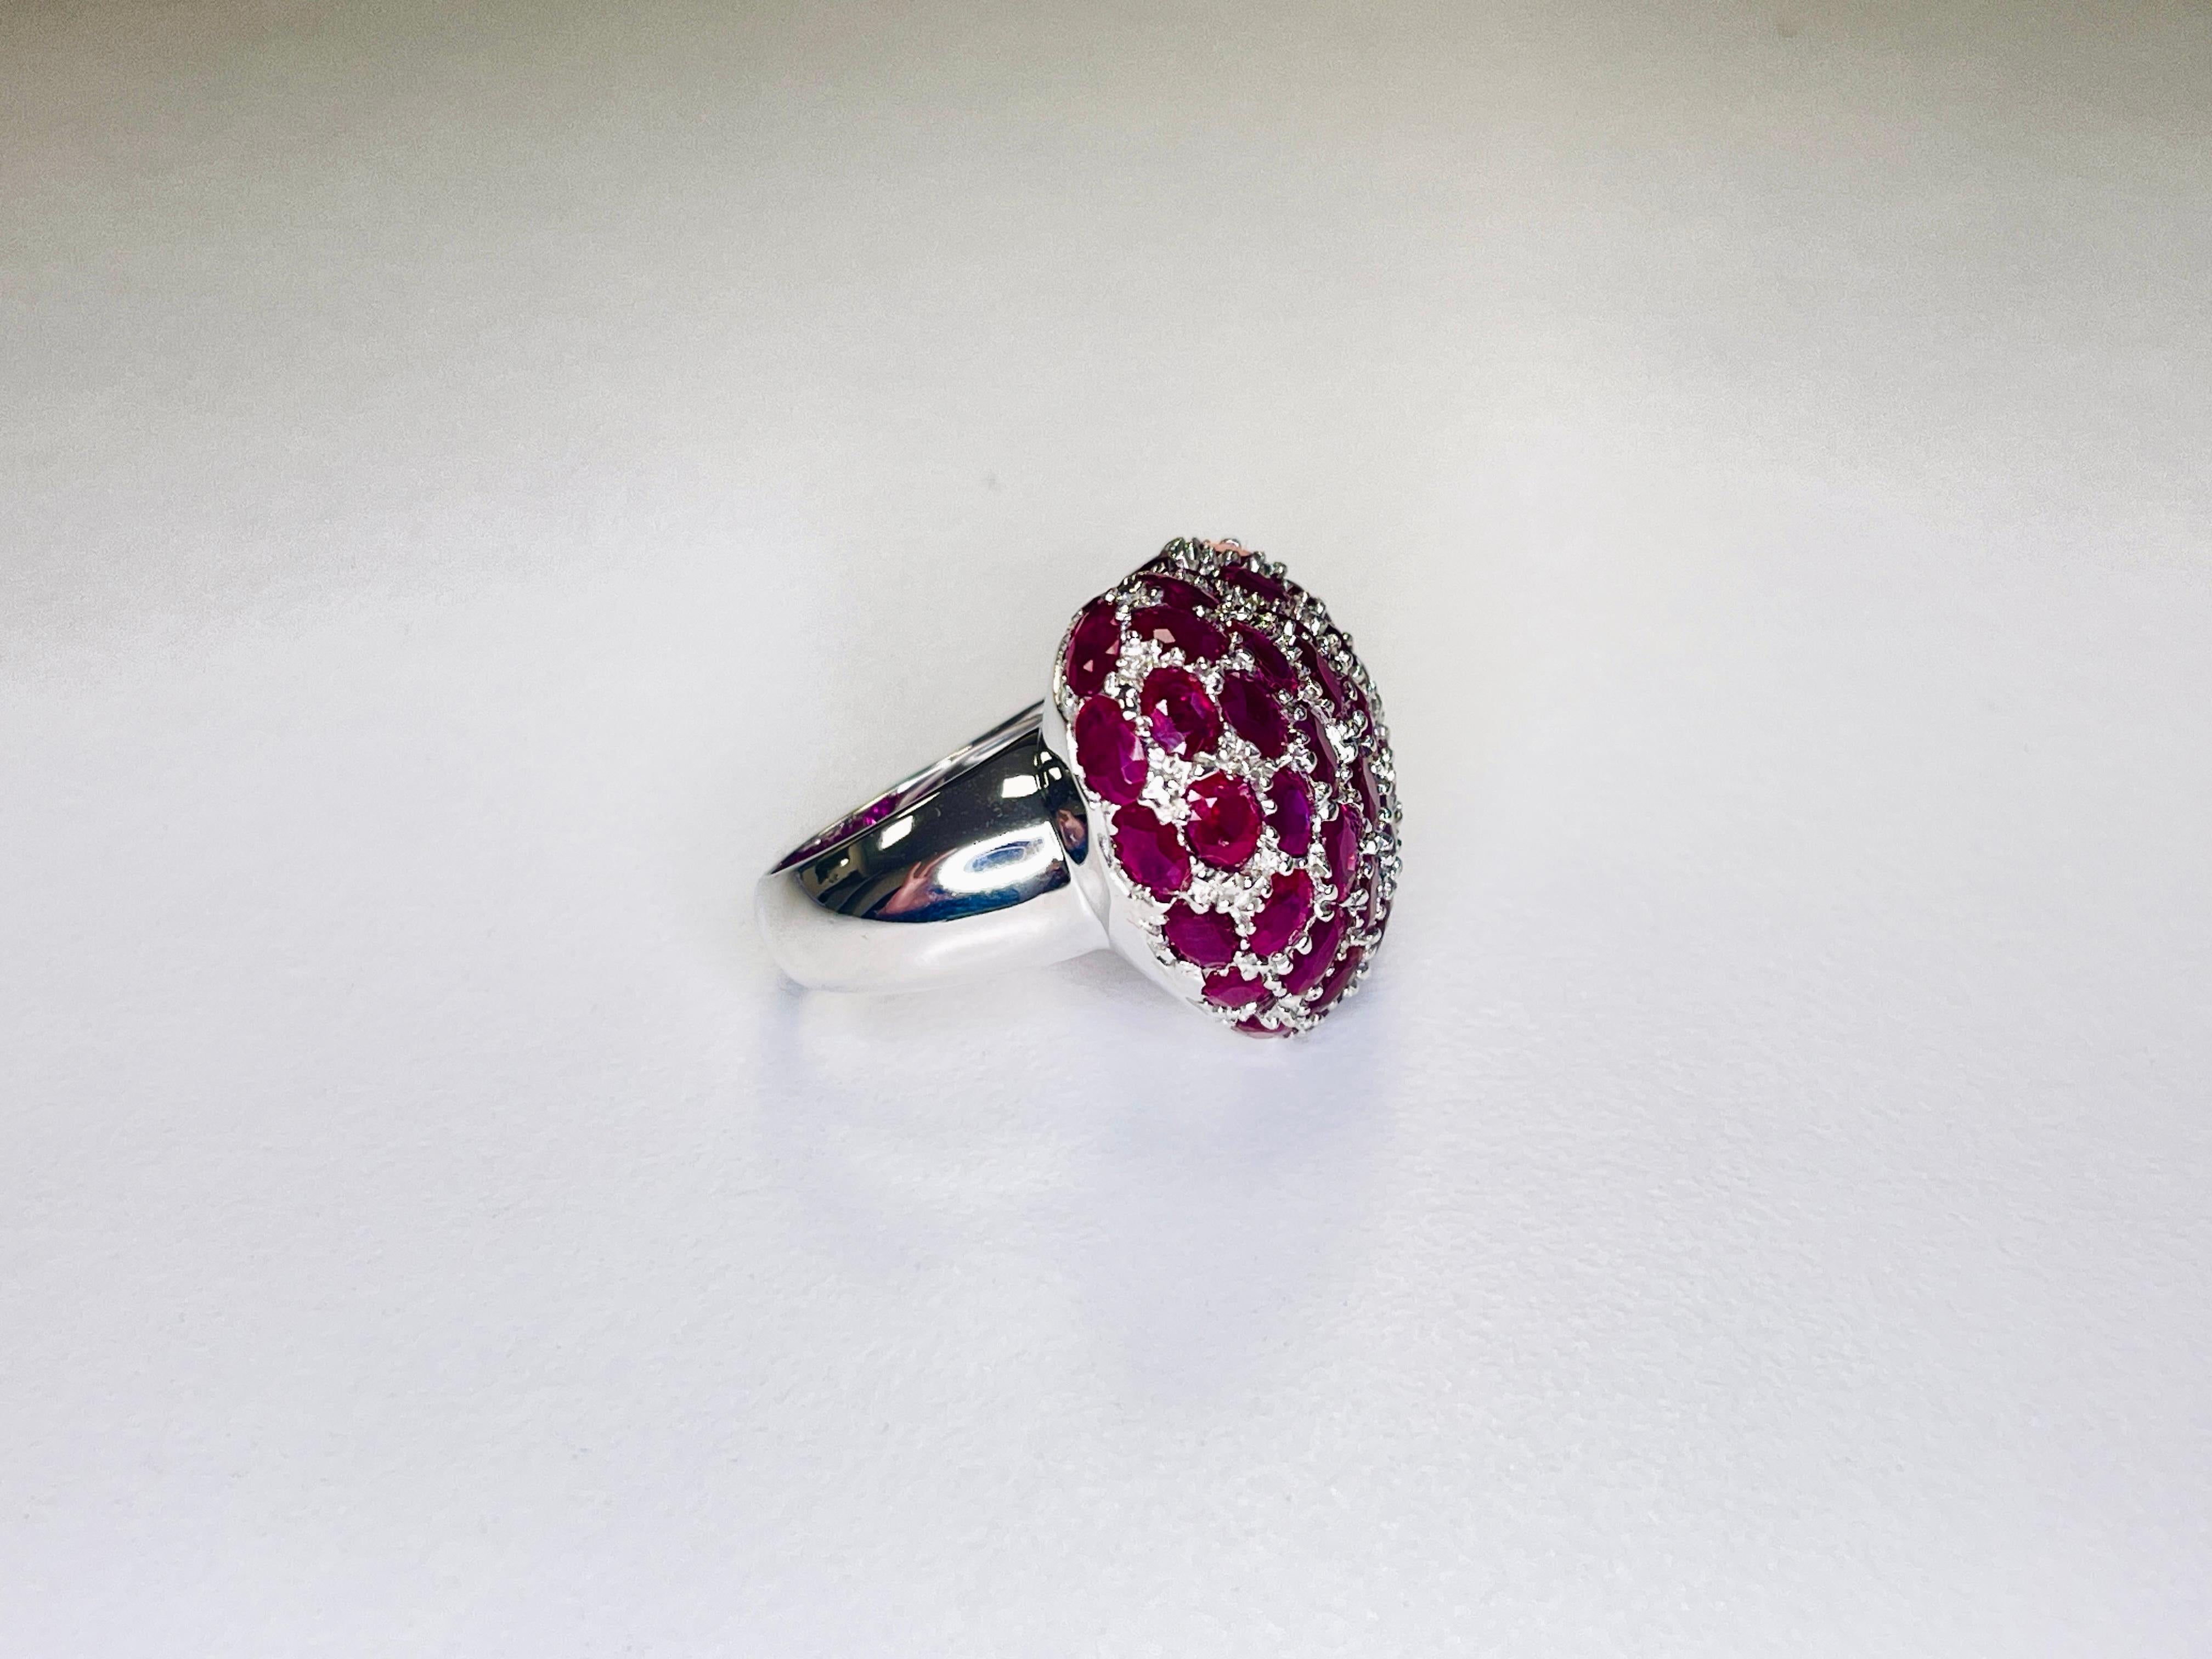 16.50cts White Gold Heart Ruby Oval Shape High Polished Rhodium Ring 18K 7 Inch For Sale 1